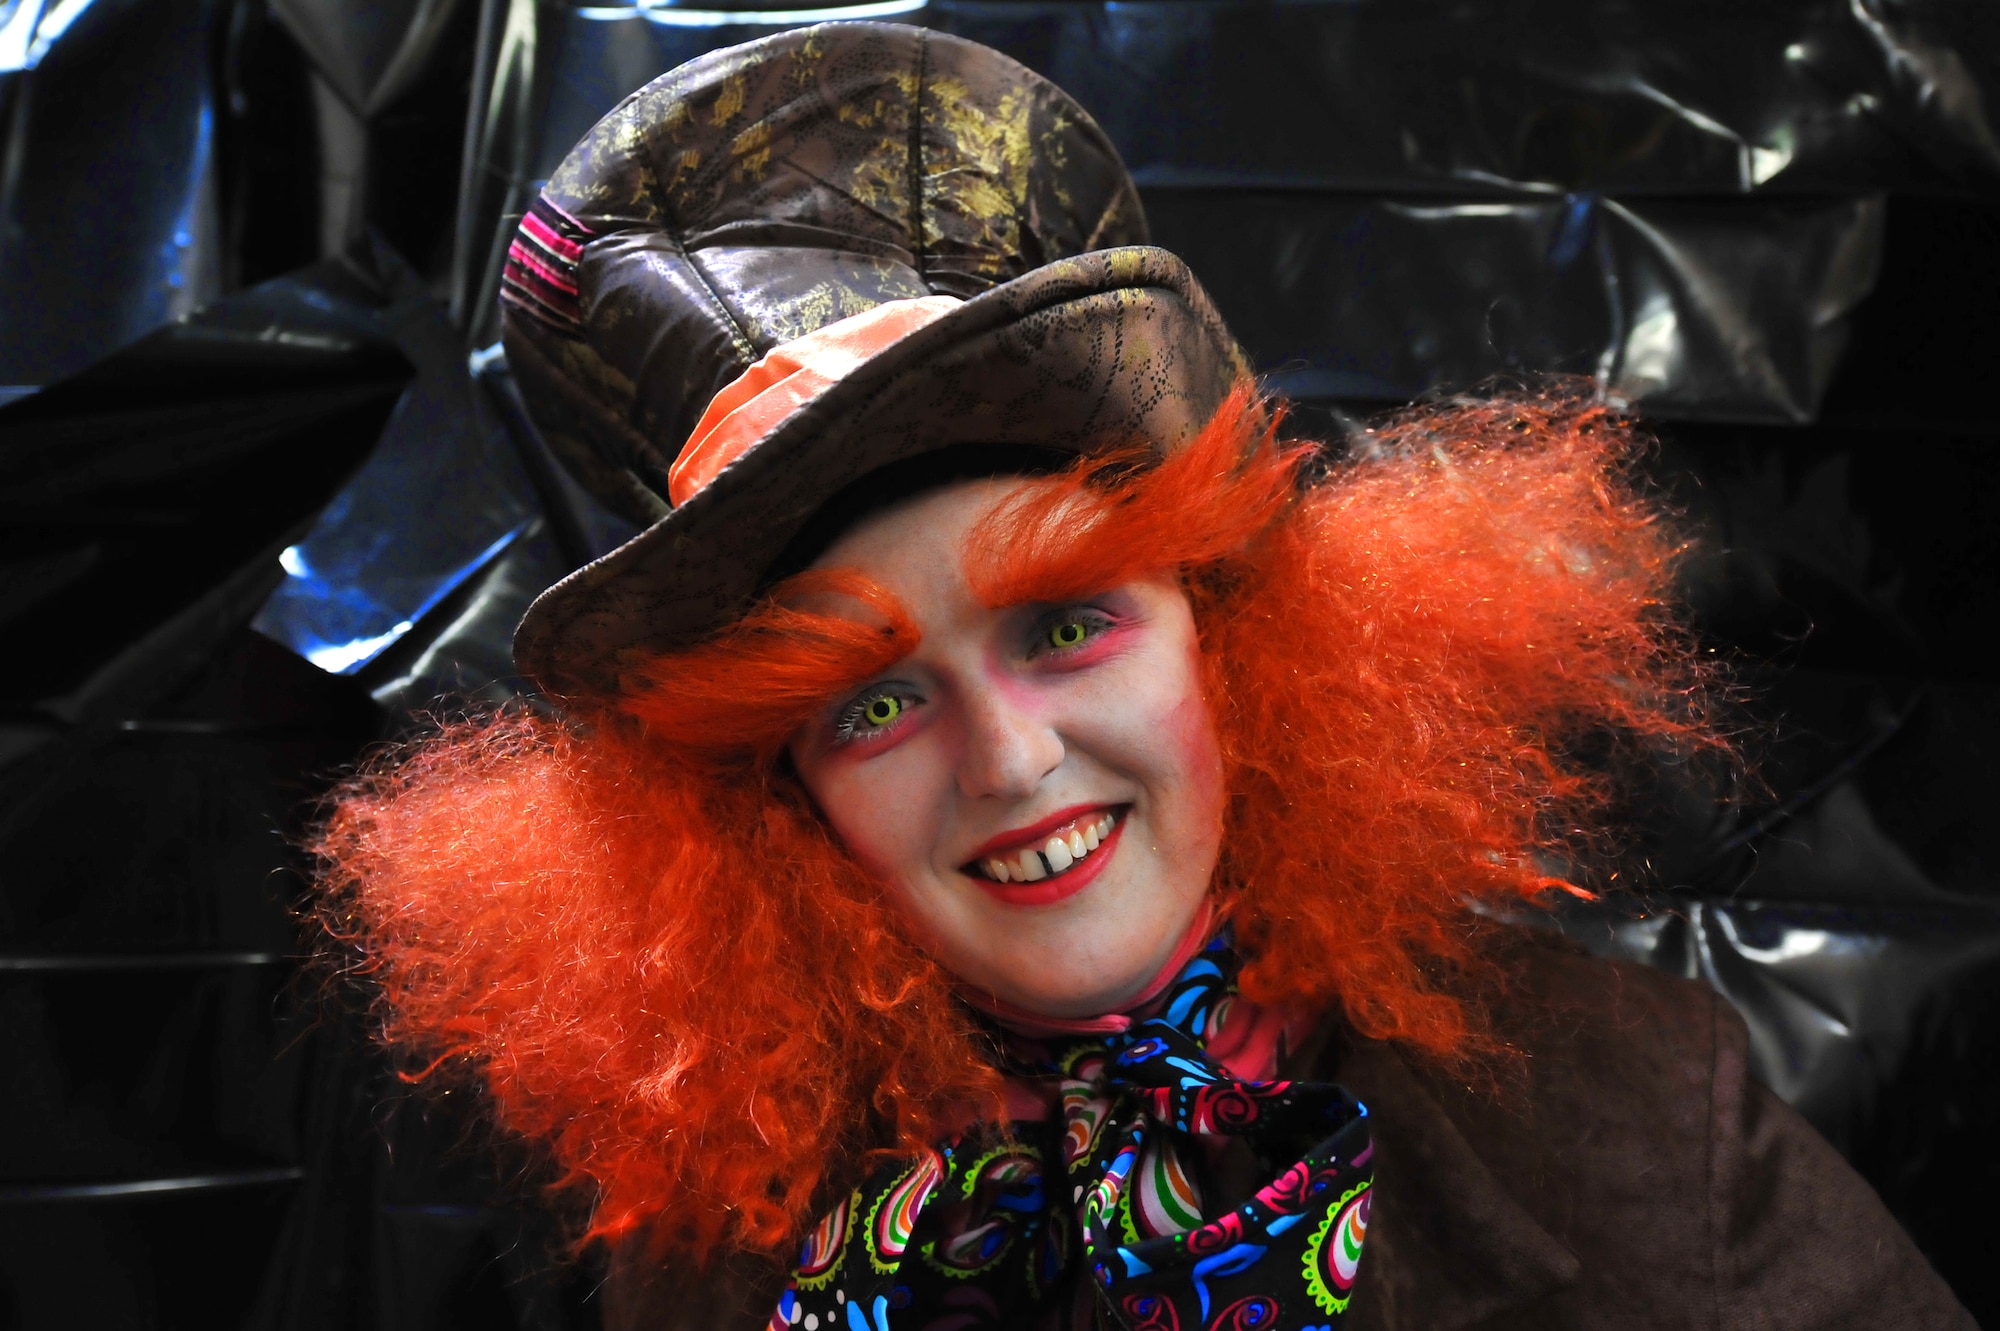 MINOT AIR FORCE BASE, N.D. -- Rebecca Zaharia, 5th Force Support Squadron marketing assistant, displays her outstanding make-up talent as she assumes the identity of the Mad Hatter. Ms. Zahira volunteered to guide victims through the 5th FSS haunted house inside the Minot Outdoor Recreation Facility here Oct. 29. Events like these keep Airmen and family morale and spirits high as cold and snow become a mainstay for Team Minot. (U.S. Air Force photo by Master Sgt. Michael Gaddis)